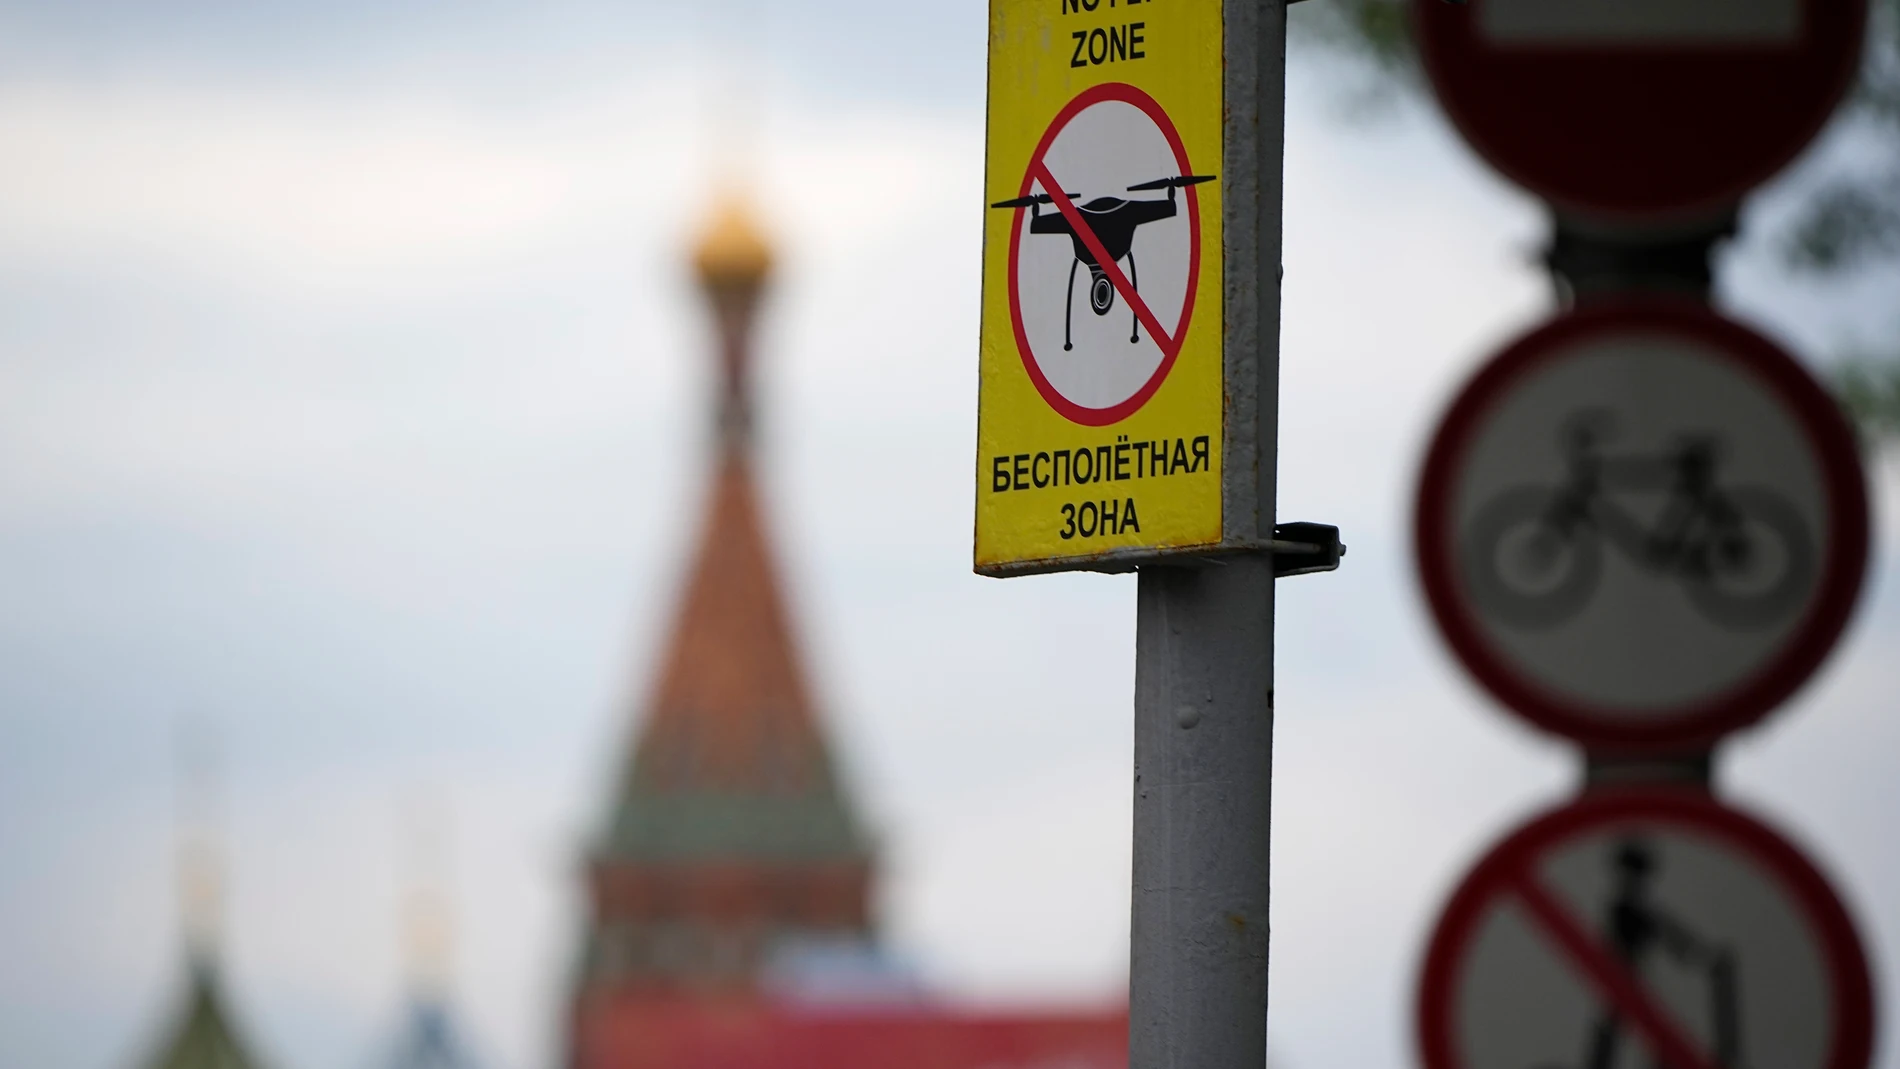 A 'No fly zone' sign is seen at the empty Red Square closed for Victory Parade preparation, next to the Moscow Kremlin, in Moscow, Russia, Wednesday, May 3, 2023. Russian authorities have accused Ukraine of attempting to attack the Kremlin with two drones overnight. The Kremlin on Wednesday decried the alleged attack attempt as a "terrorist act" and said Russian military and security forces disabled the drones before they could strike. (AP Photo/Alexander Zemlianichenko)